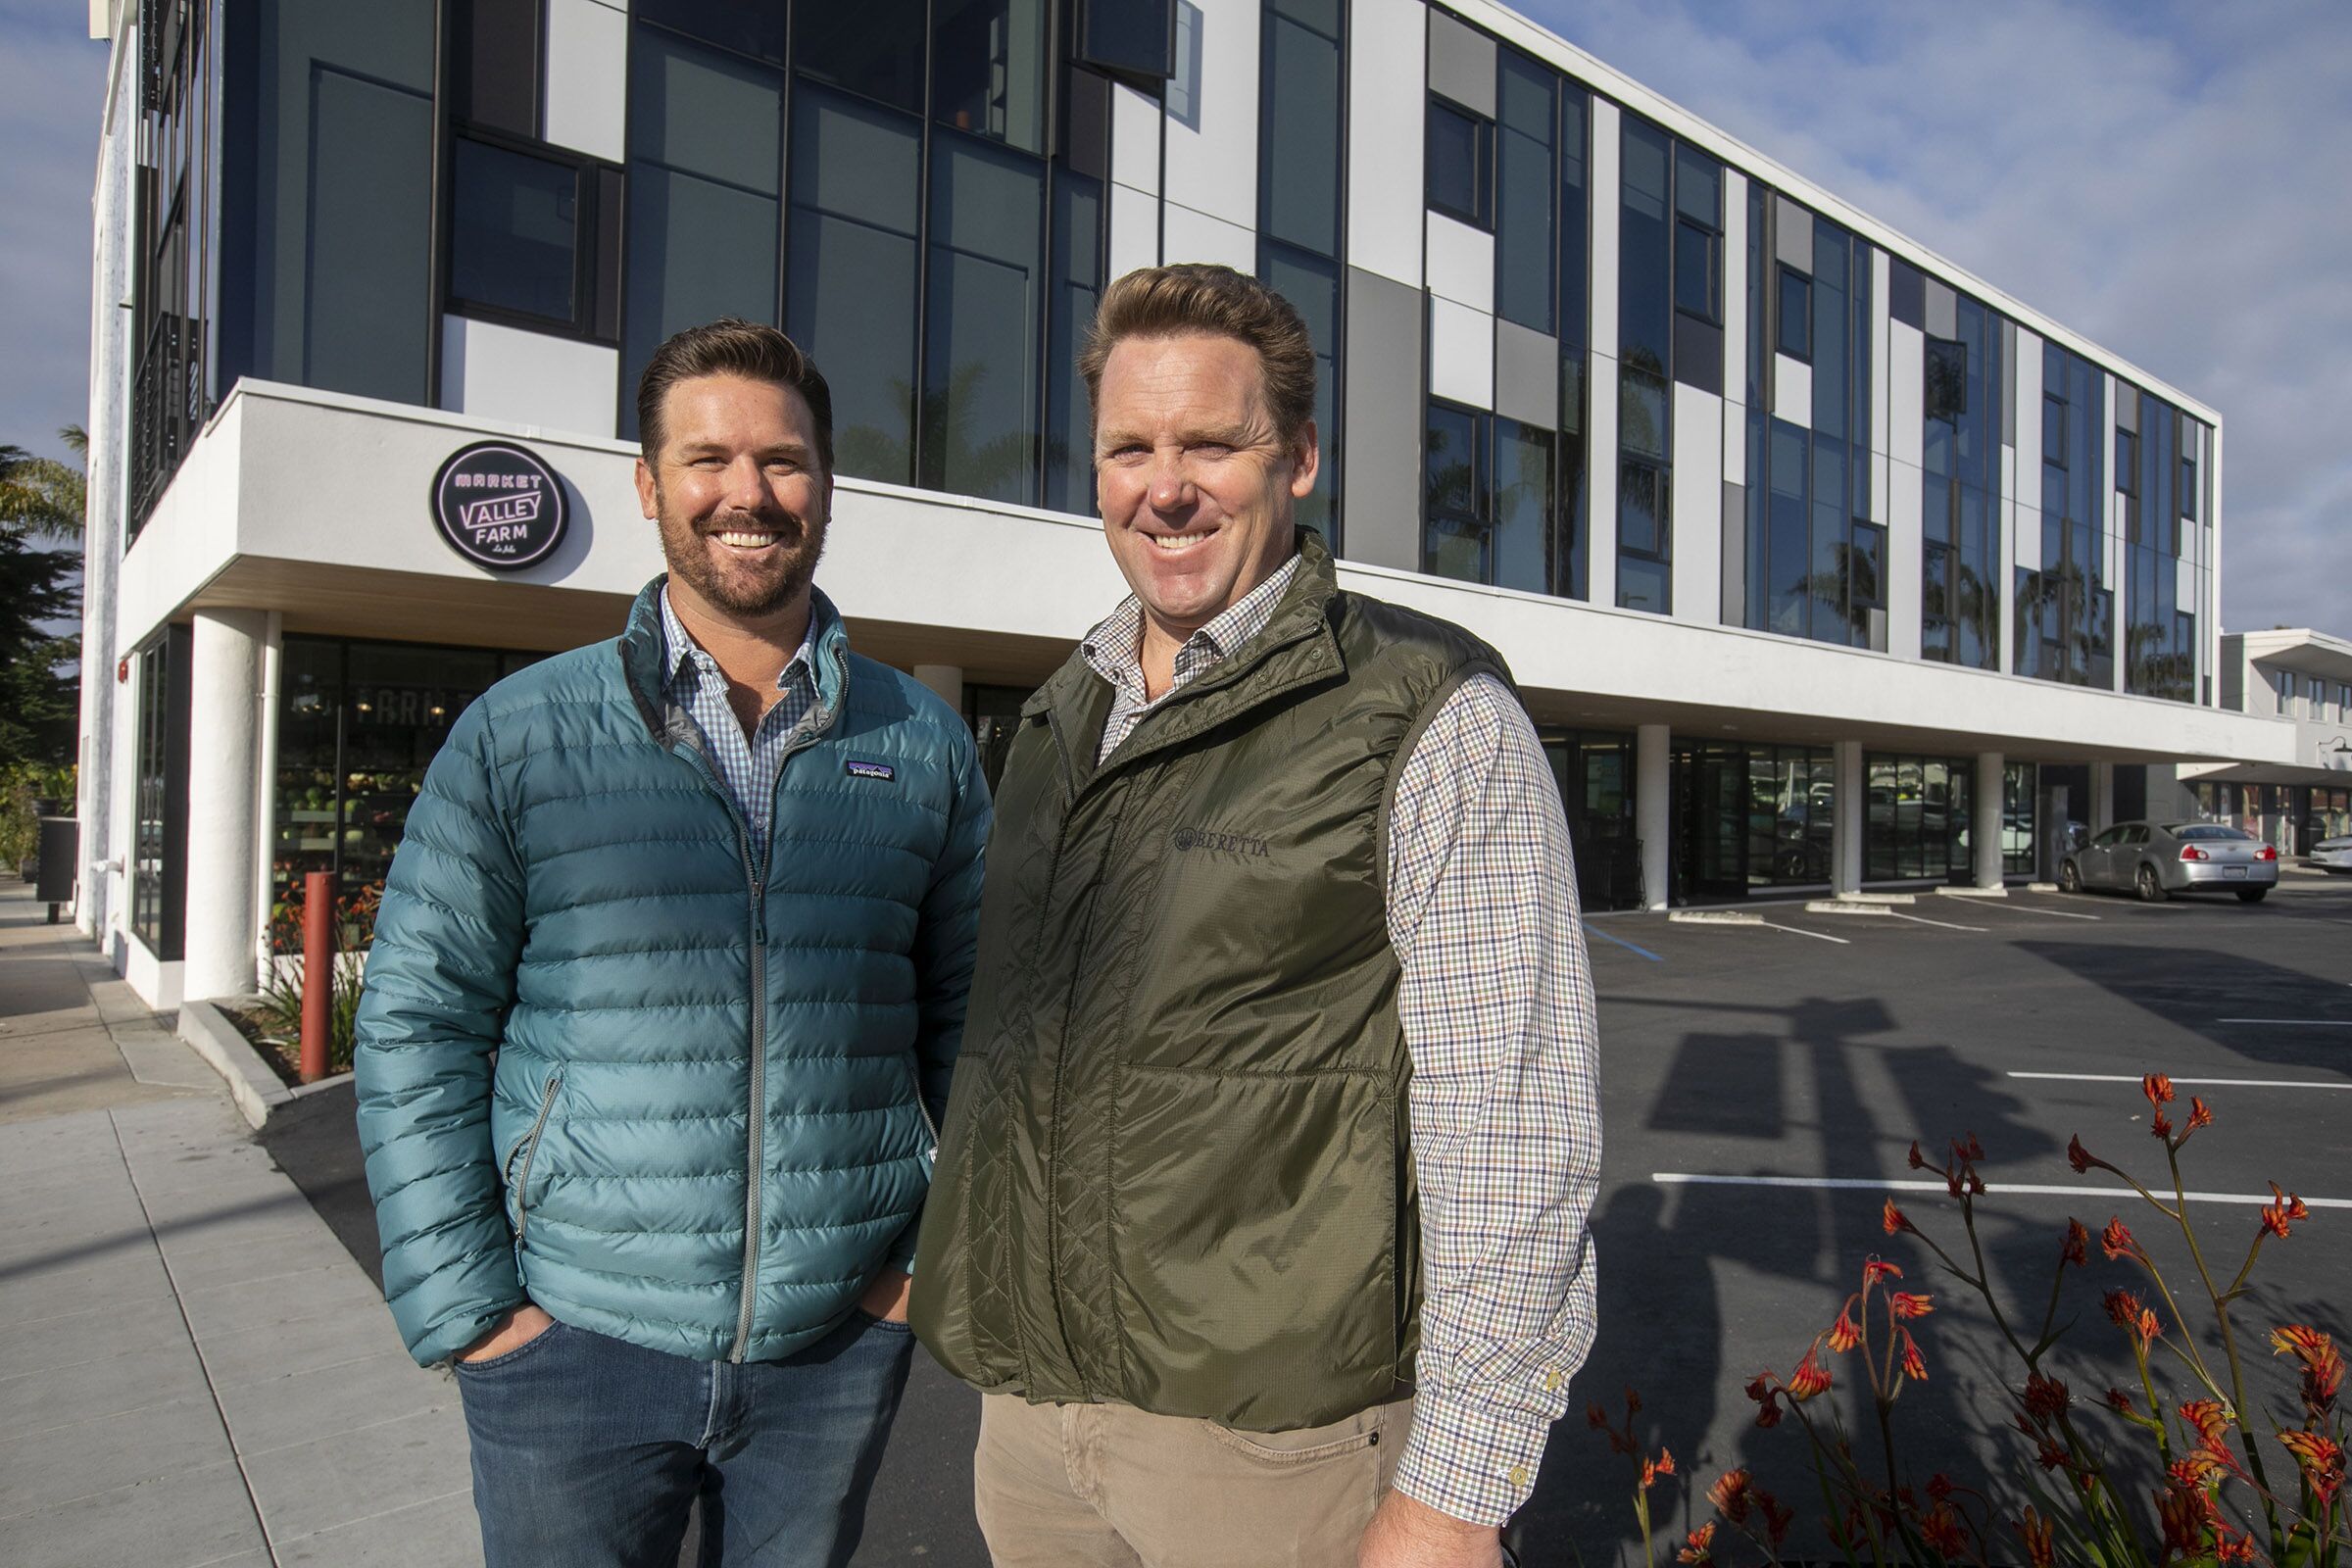 Developers Scott Murfey, right, and his brother Russ Murfey , left, outside of their recently completed Collins luxury apartment complex on La Jolla Boulevard.